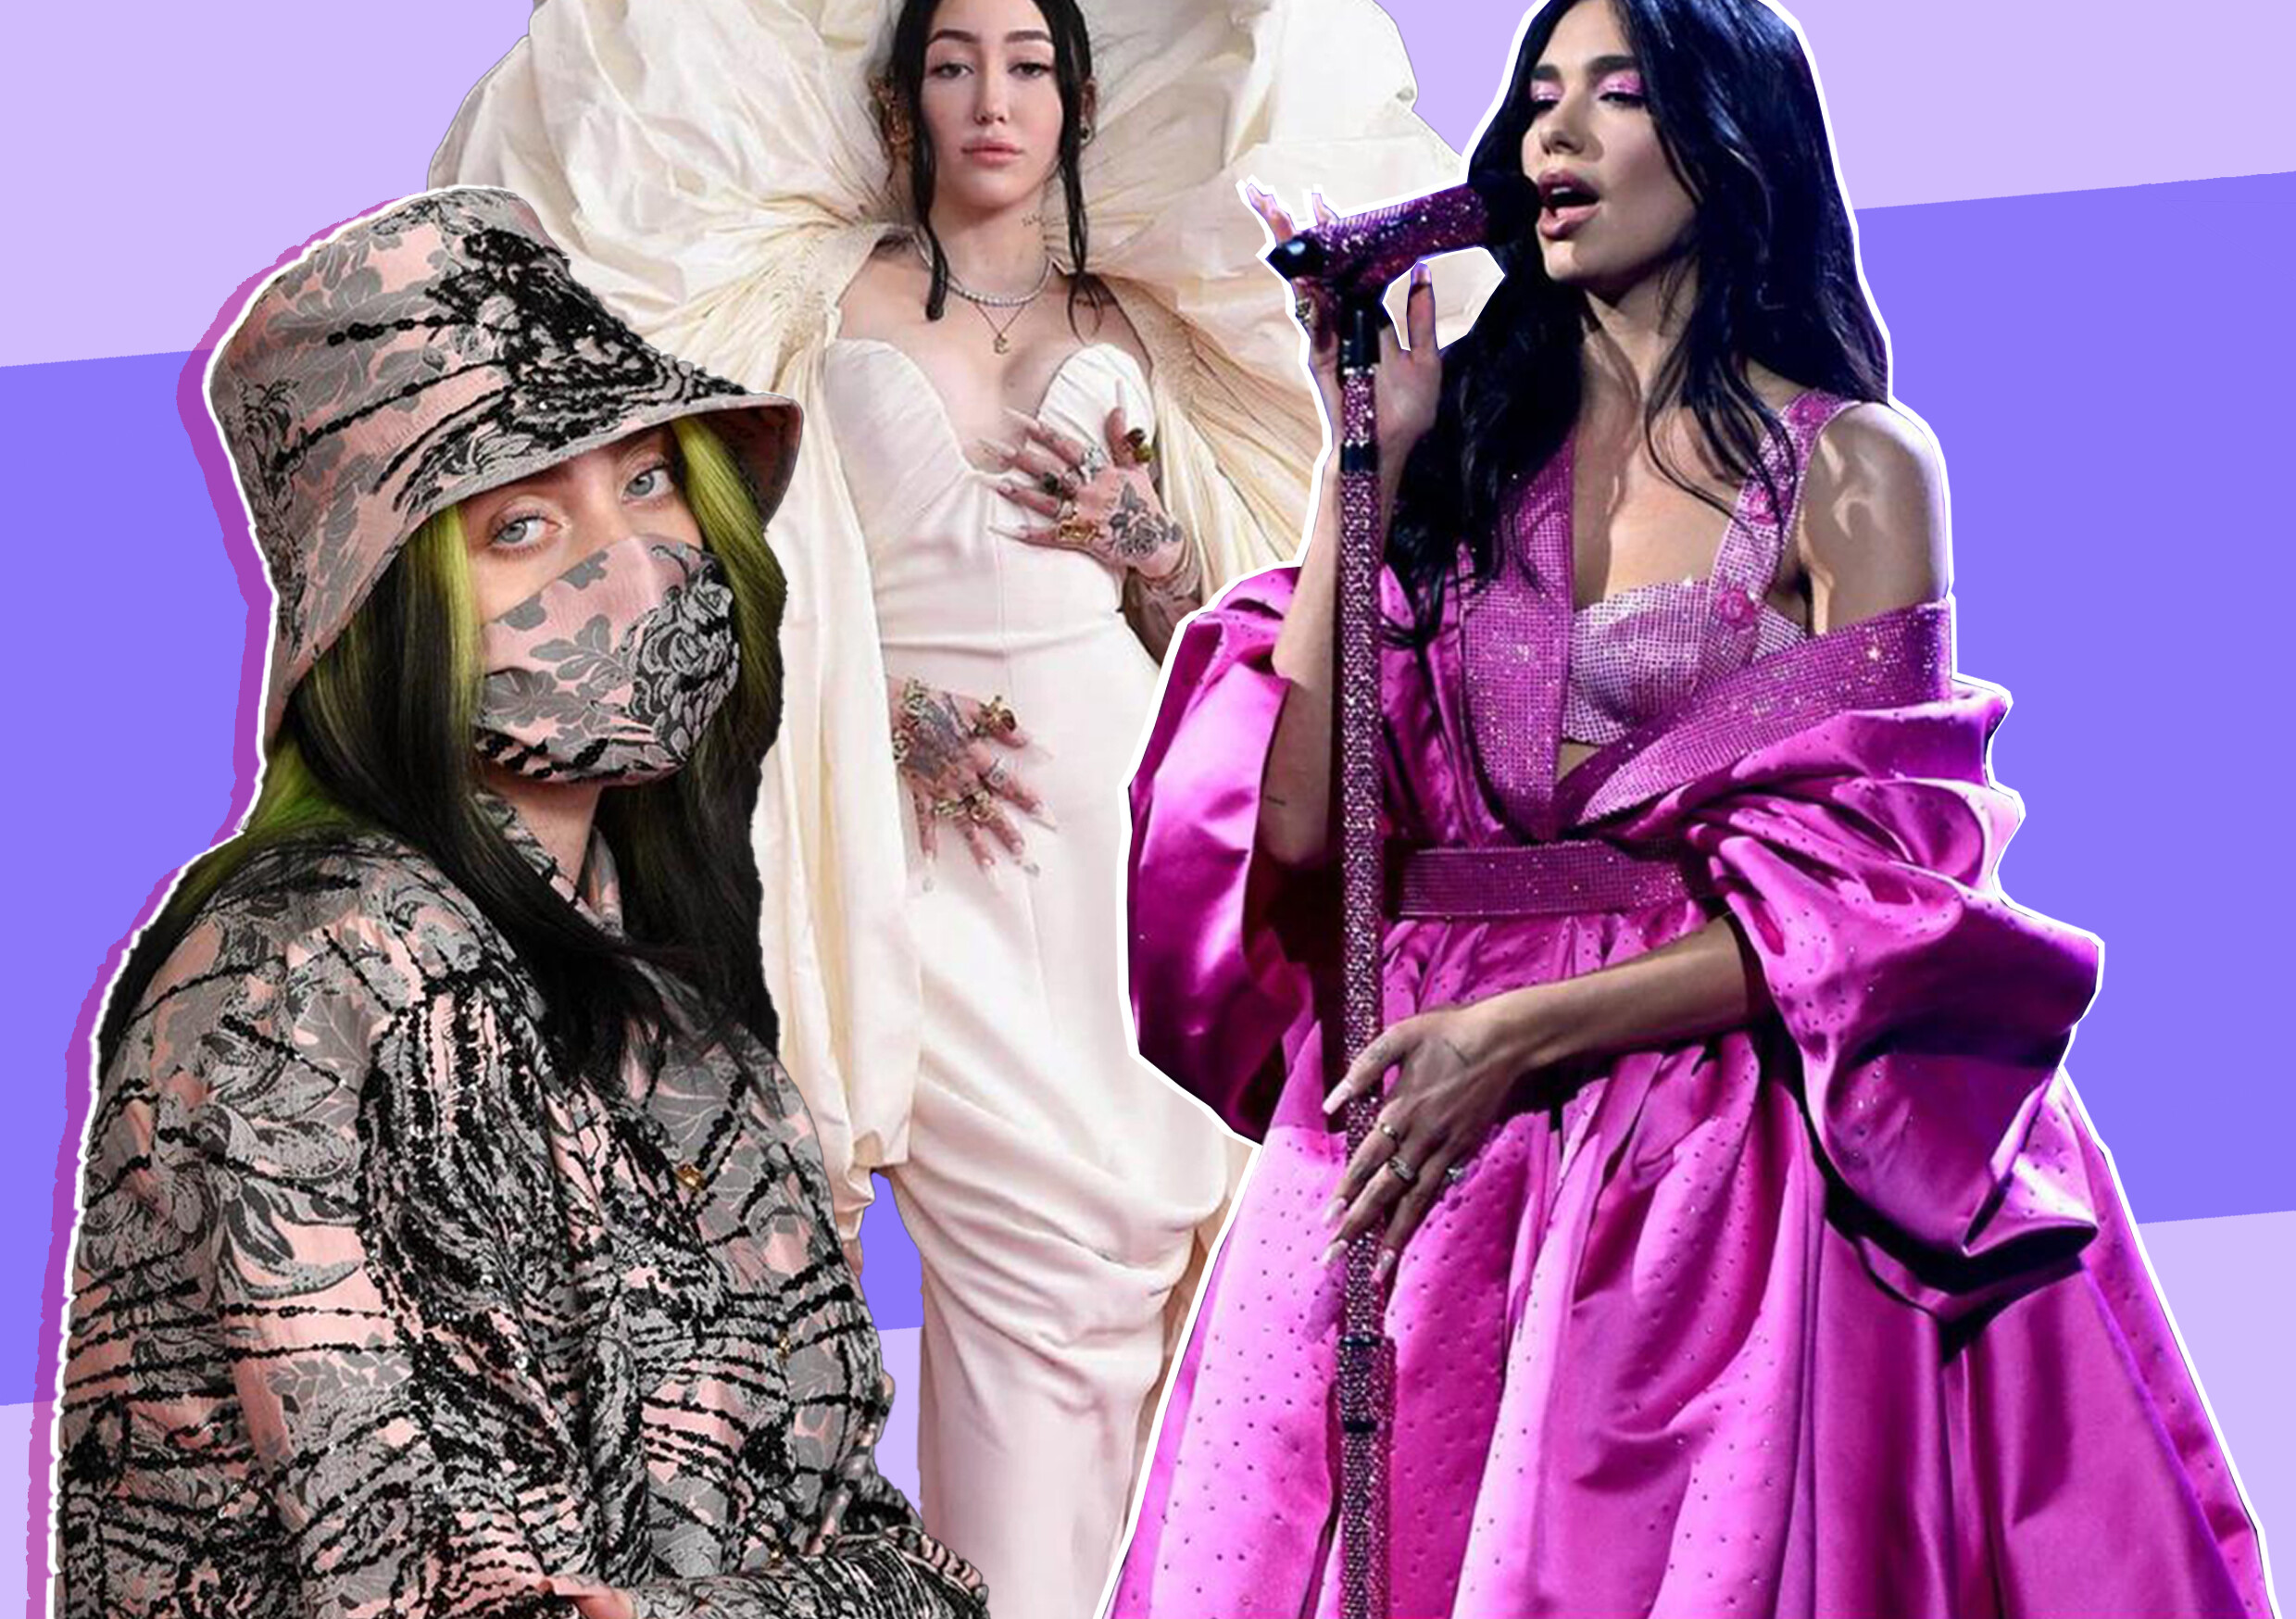 You Have to See Dua Lipa's Outfits During Her 2021 Grammys Performance